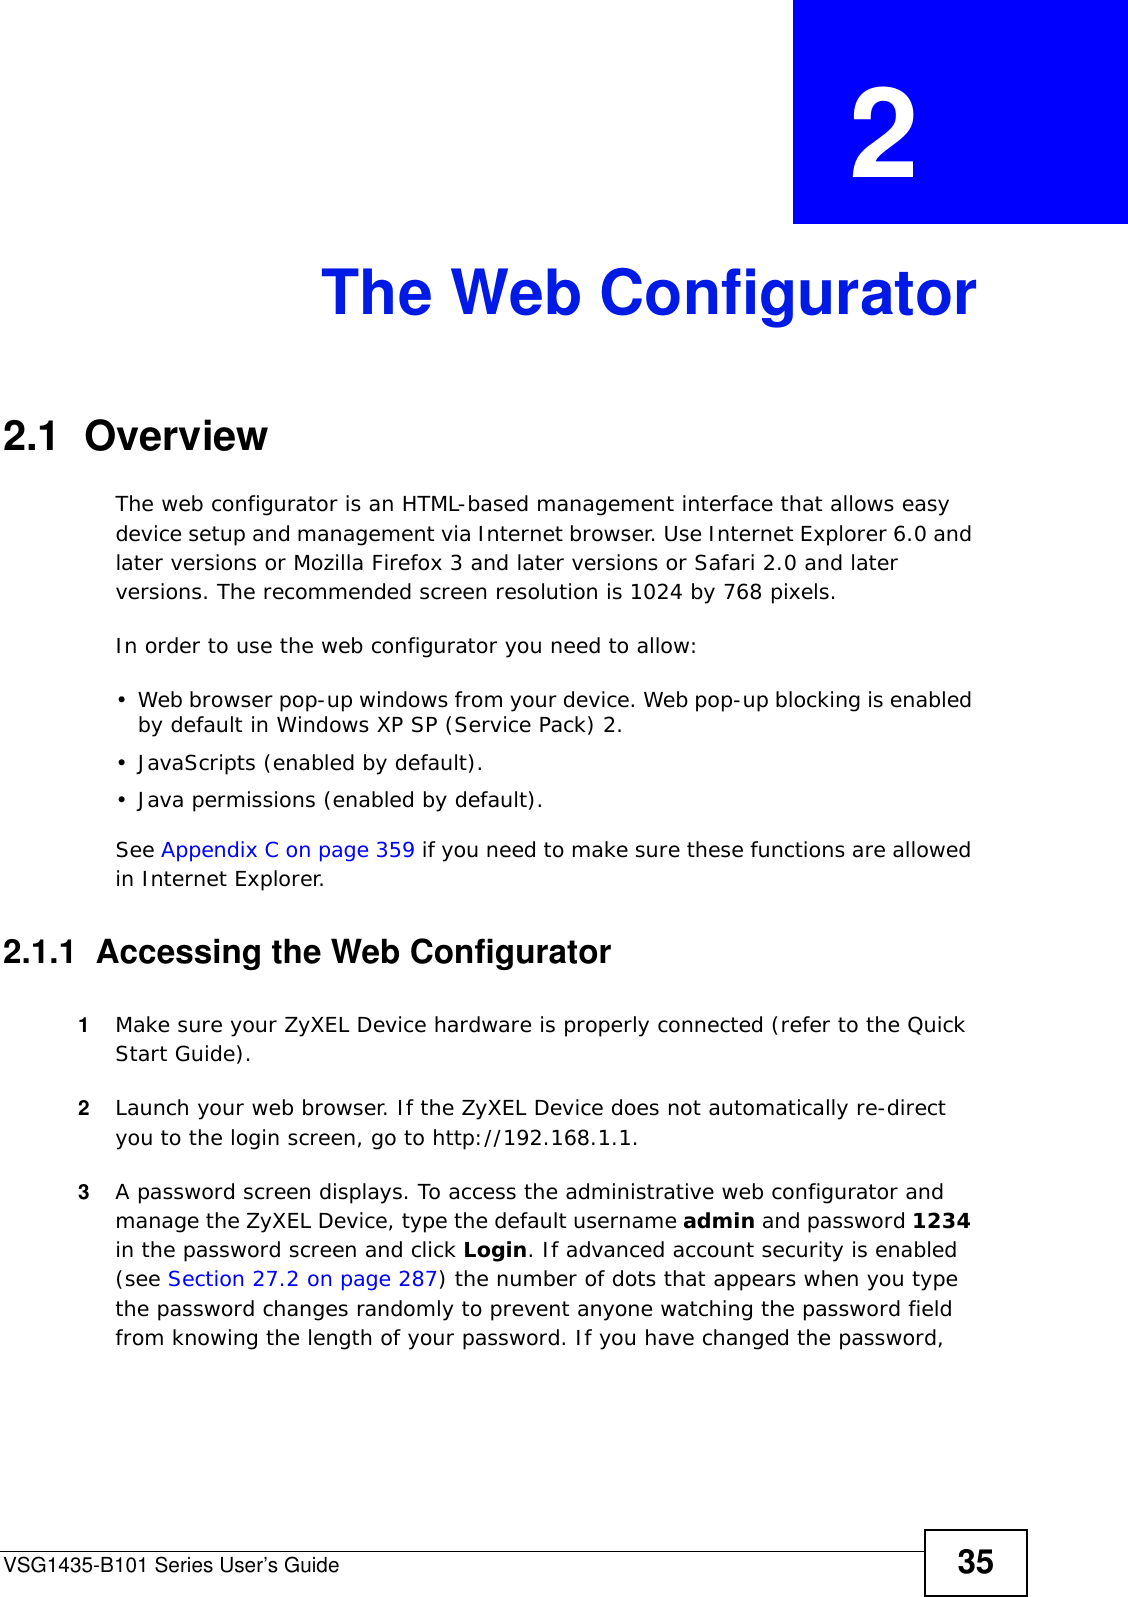 VSG1435-B101 Series User’s Guide 35CHAPTER  2 The Web Configurator2.1  OverviewThe web configurator is an HTML-based management interface that allows easy device setup and management via Internet browser. Use Internet Explorer 6.0 and later versions or Mozilla Firefox 3 and later versions or Safari 2.0 and later versions. The recommended screen resolution is 1024 by 768 pixels.In order to use the web configurator you need to allow:• Web browser pop-up windows from your device. Web pop-up blocking is enabled by default in Windows XP SP (Service Pack) 2.• JavaScripts (enabled by default).• Java permissions (enabled by default).See Appendix C on page 359 if you need to make sure these functions are allowed in Internet Explorer. 2.1.1  Accessing the Web Configurator1Make sure your ZyXEL Device hardware is properly connected (refer to the Quick Start Guide).2Launch your web browser. If the ZyXEL Device does not automatically re-direct you to the login screen, go to http://192.168.1.1.3A password screen displays. To access the administrative web configurator and manage the ZyXEL Device, type the default username admin and password 1234 in the password screen and click Login. If advanced account security is enabled (see Section 27.2 on page 287) the number of dots that appears when you type the password changes randomly to prevent anyone watching the password field from knowing the length of your password. If you have changed the password, 